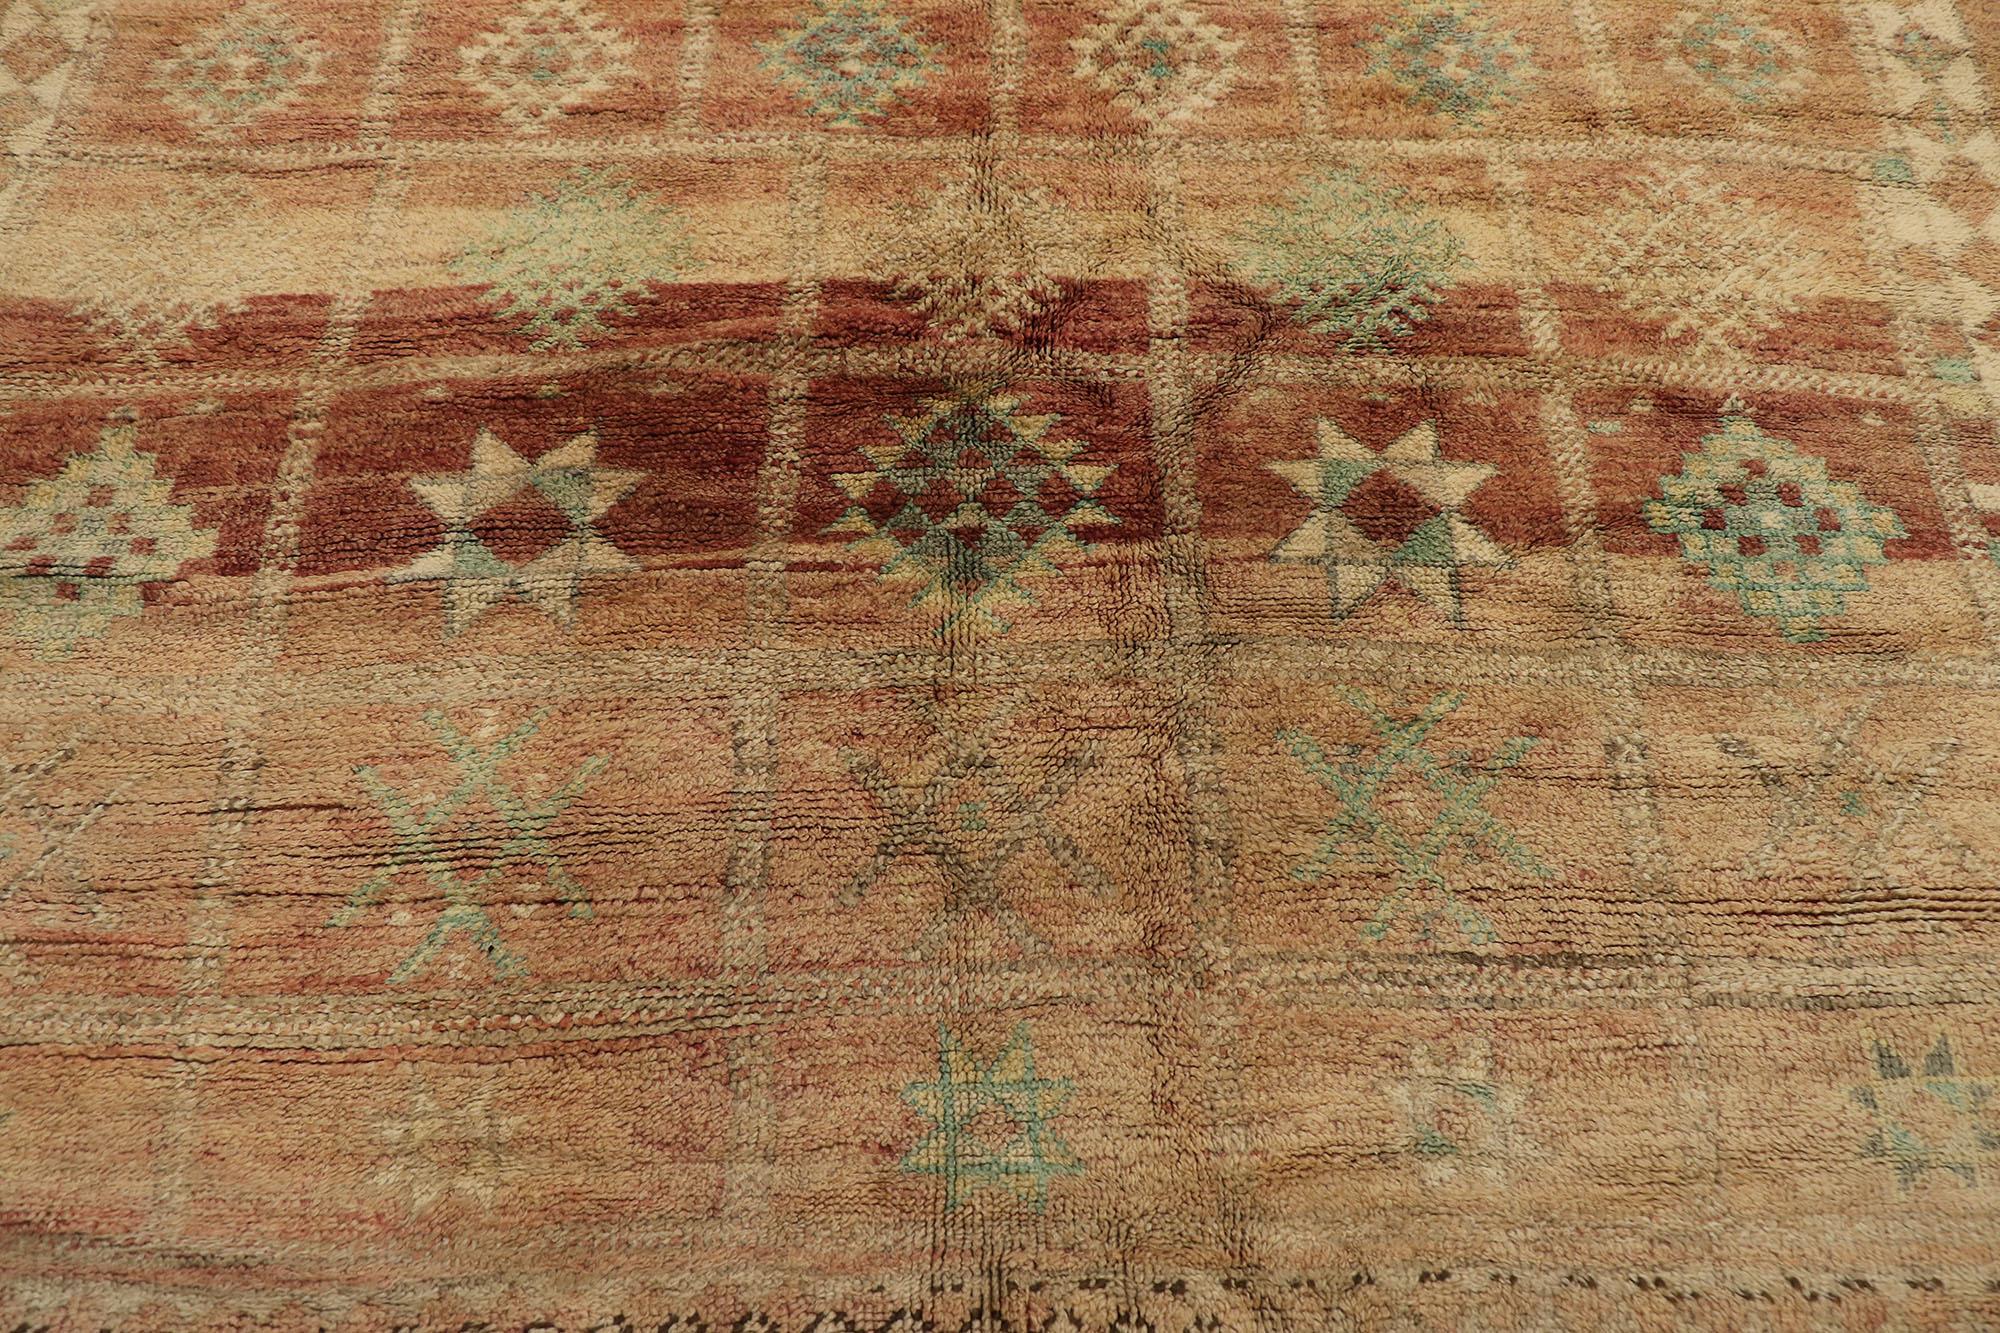 Vintage Beni MGuild Moroccan Rug, Spicy Global Style Meets Organic Modern In Good Condition For Sale In Dallas, TX